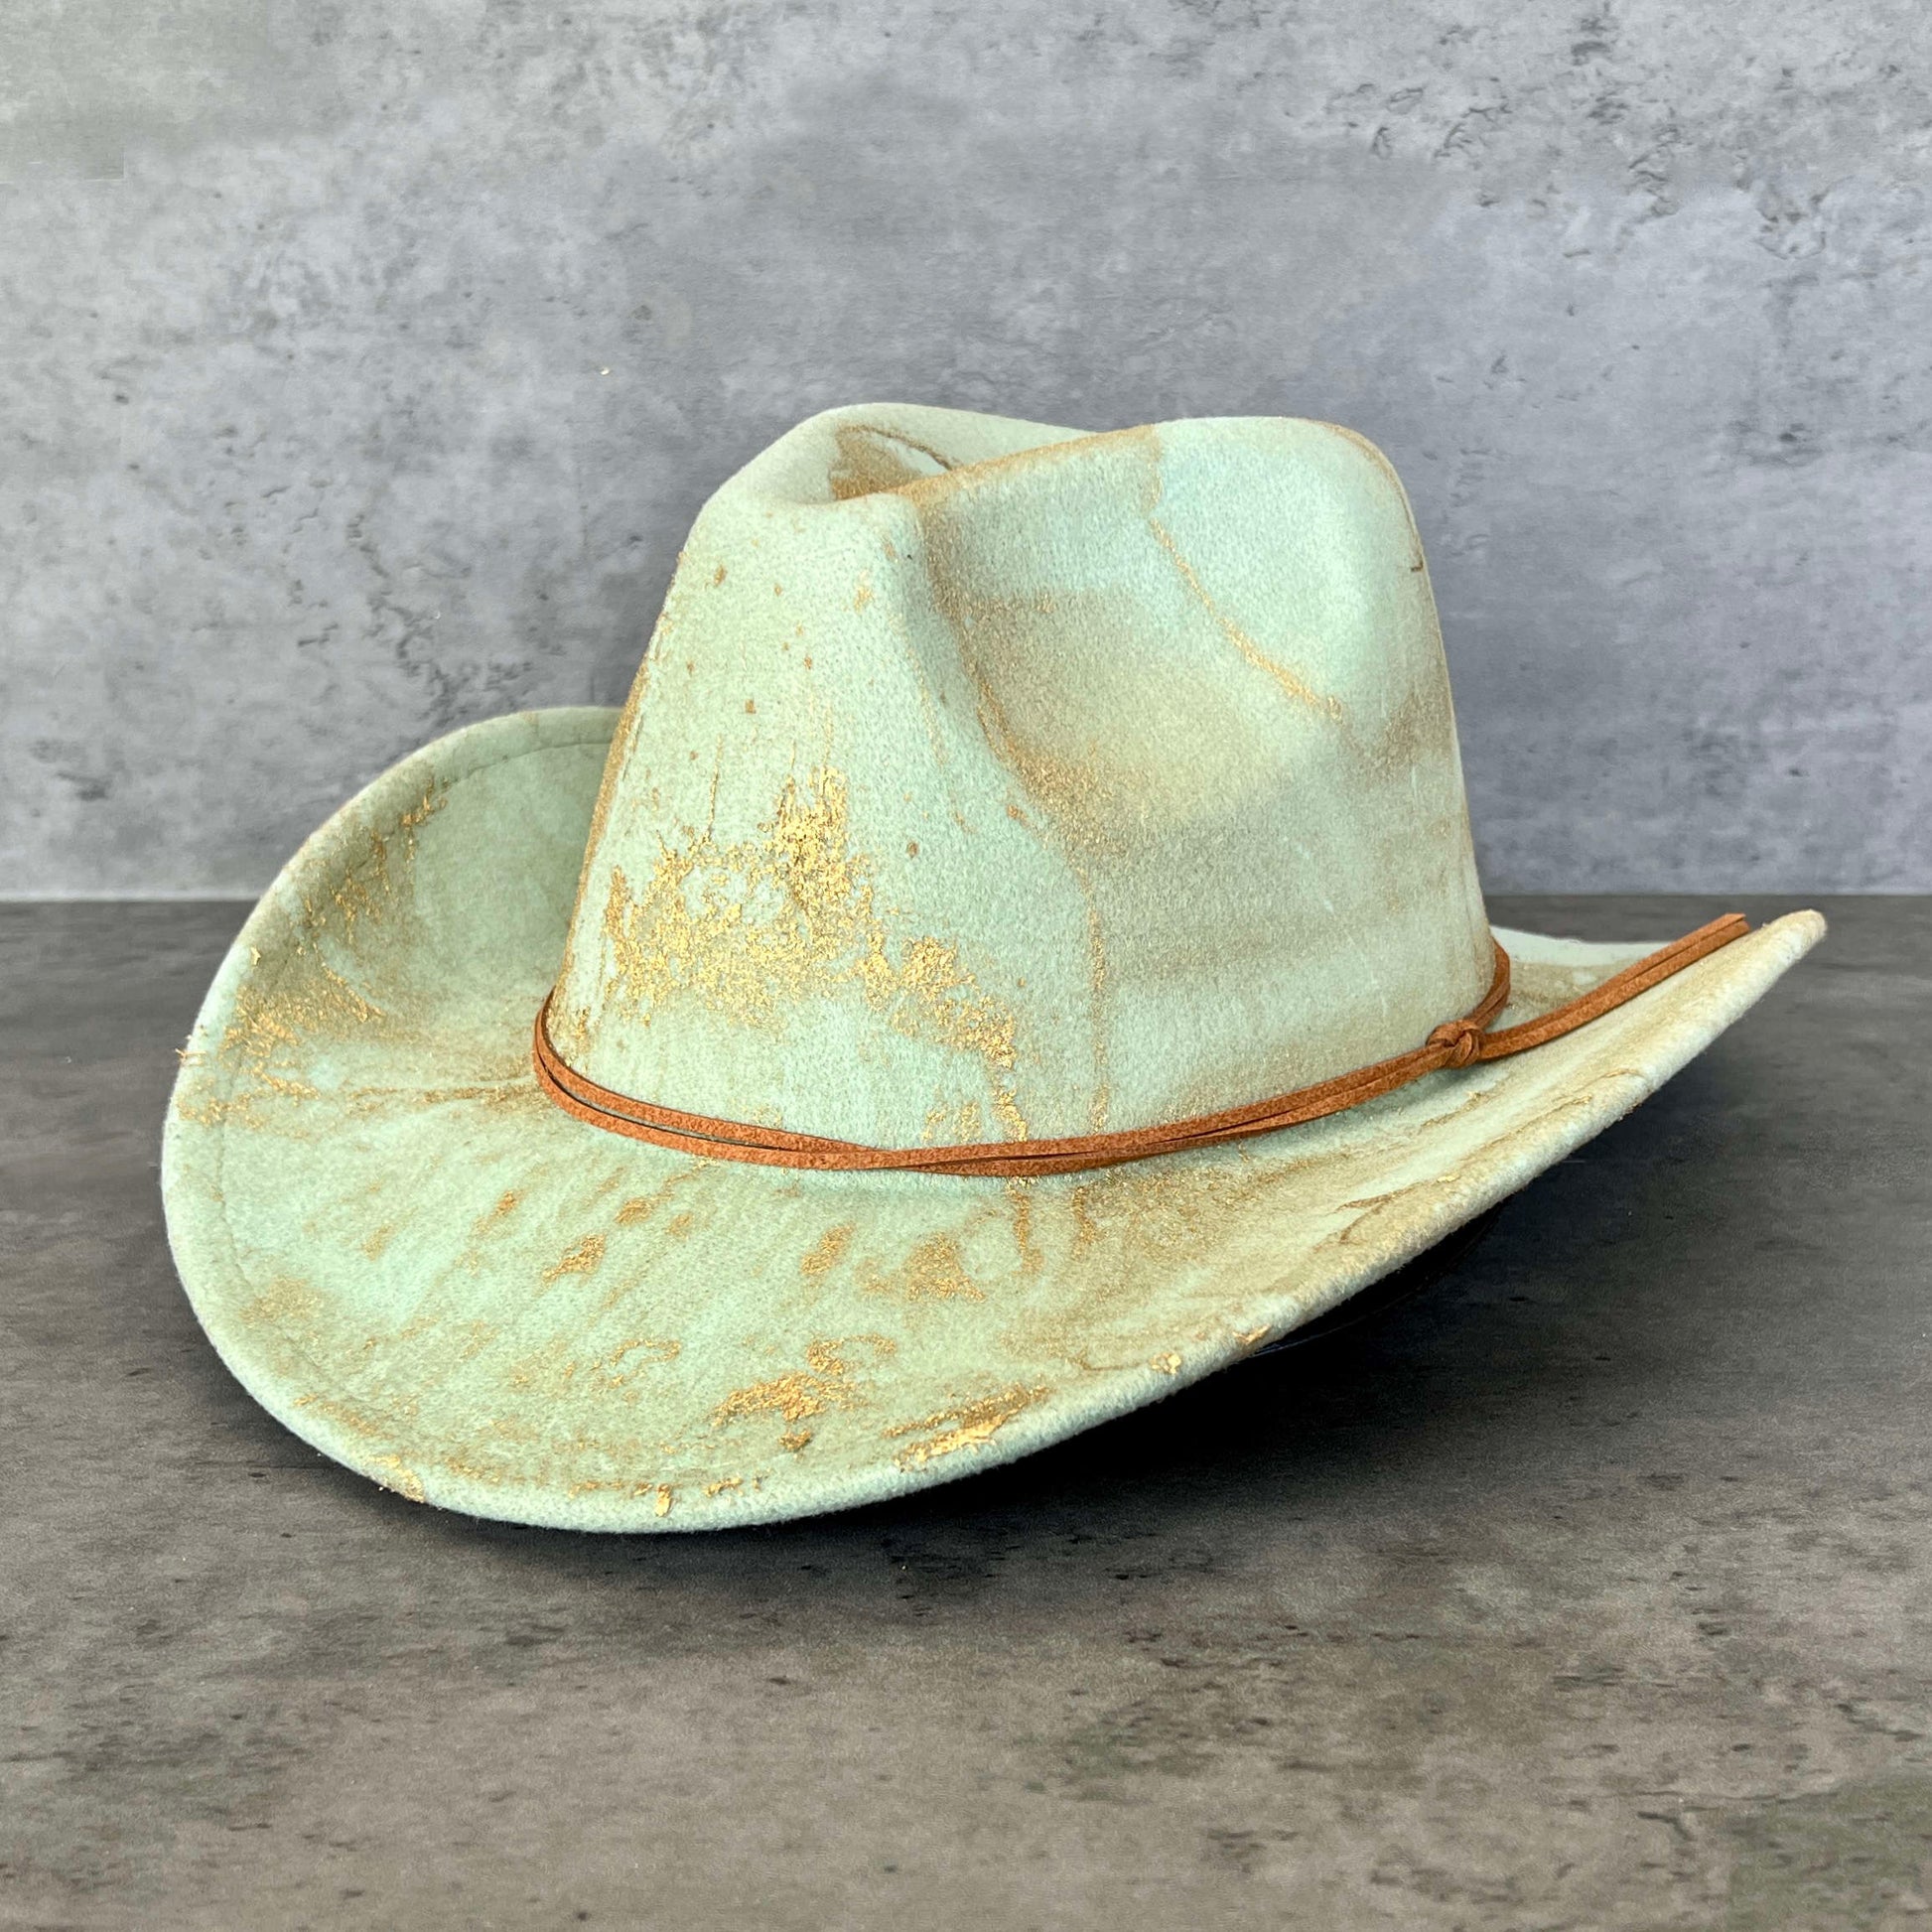 Mint seafoam green western cowboy hat painted with gold marbling. Has light brown faux suede cord hat band. 